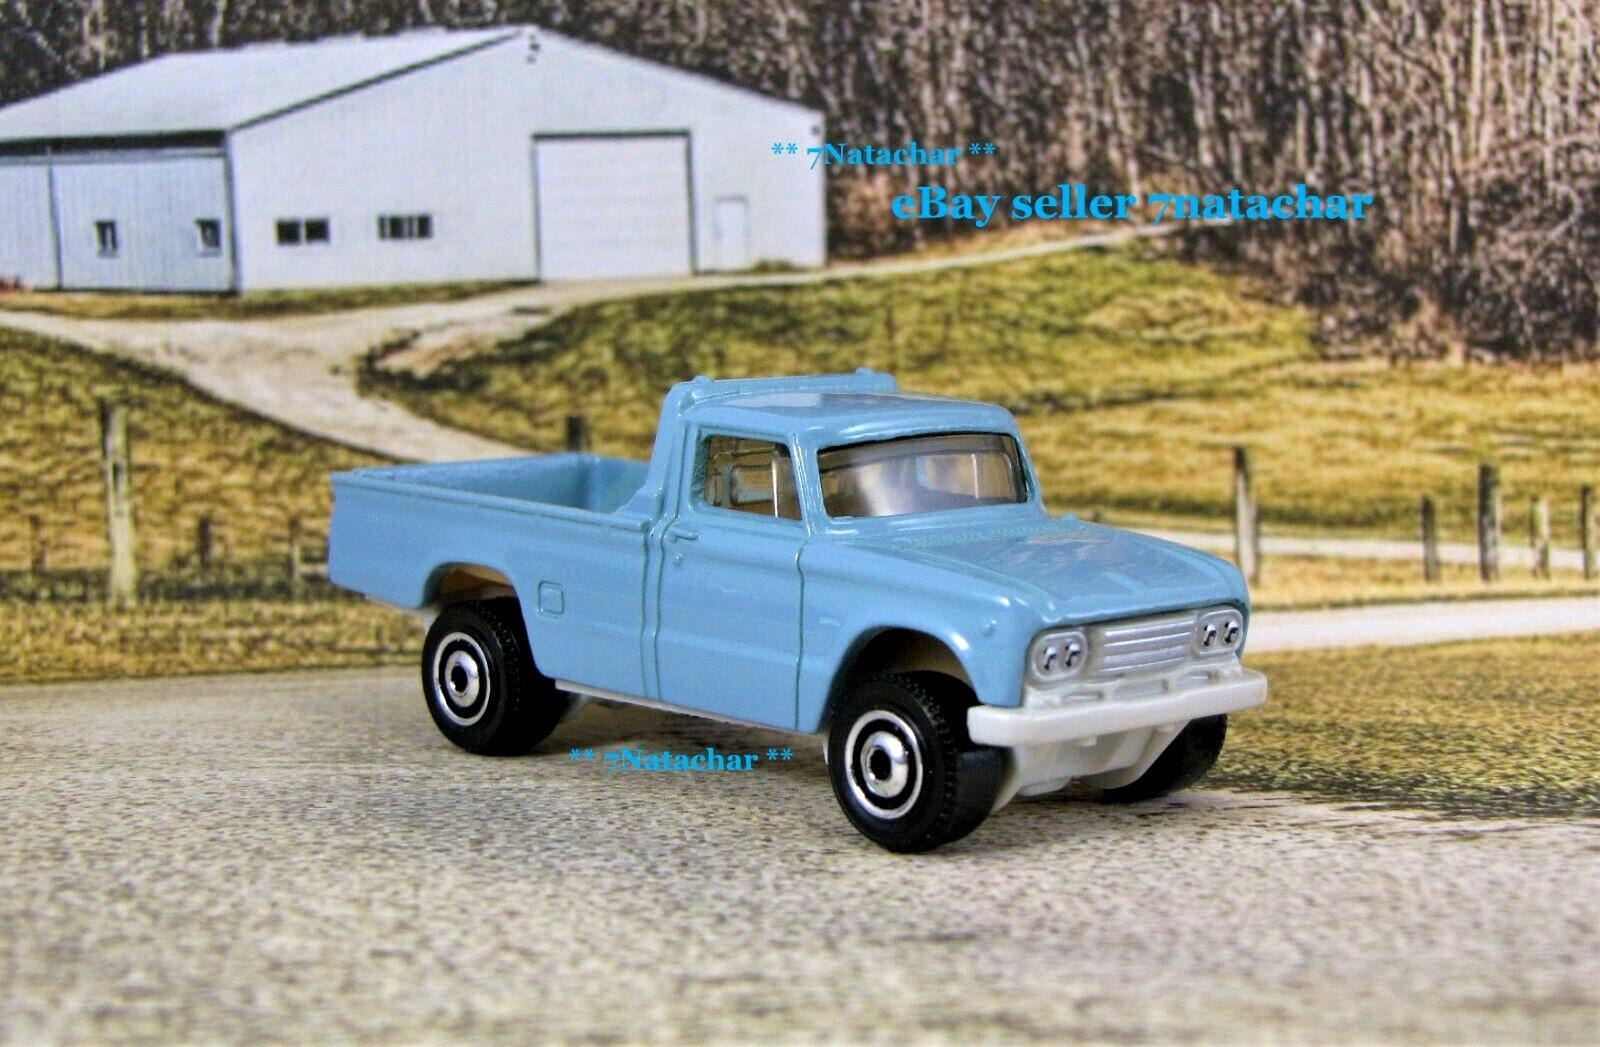 1962 - 1966 Nissan Junior Truck With Hitch Classic Pickup Truck Model Blue A1